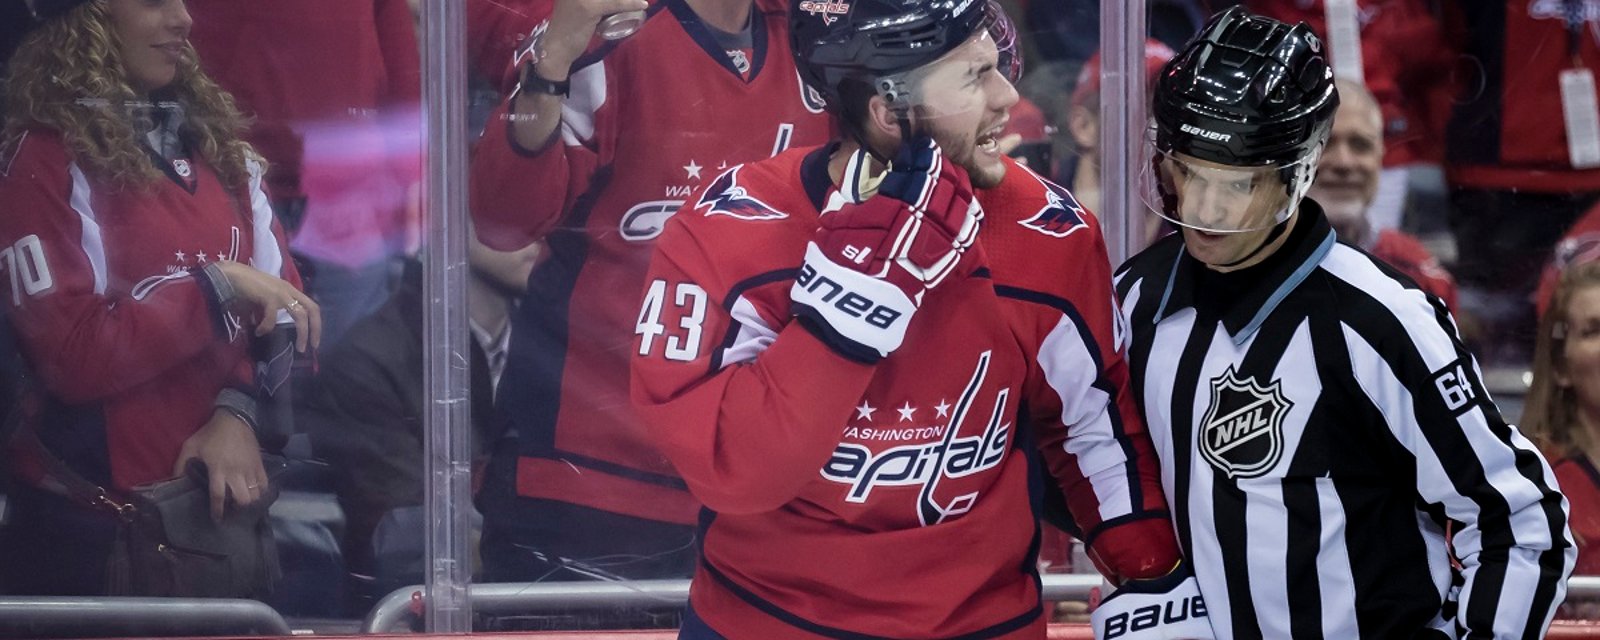 Reporter claims Tom Wilson was “ejected from the game for shoving a ref.”